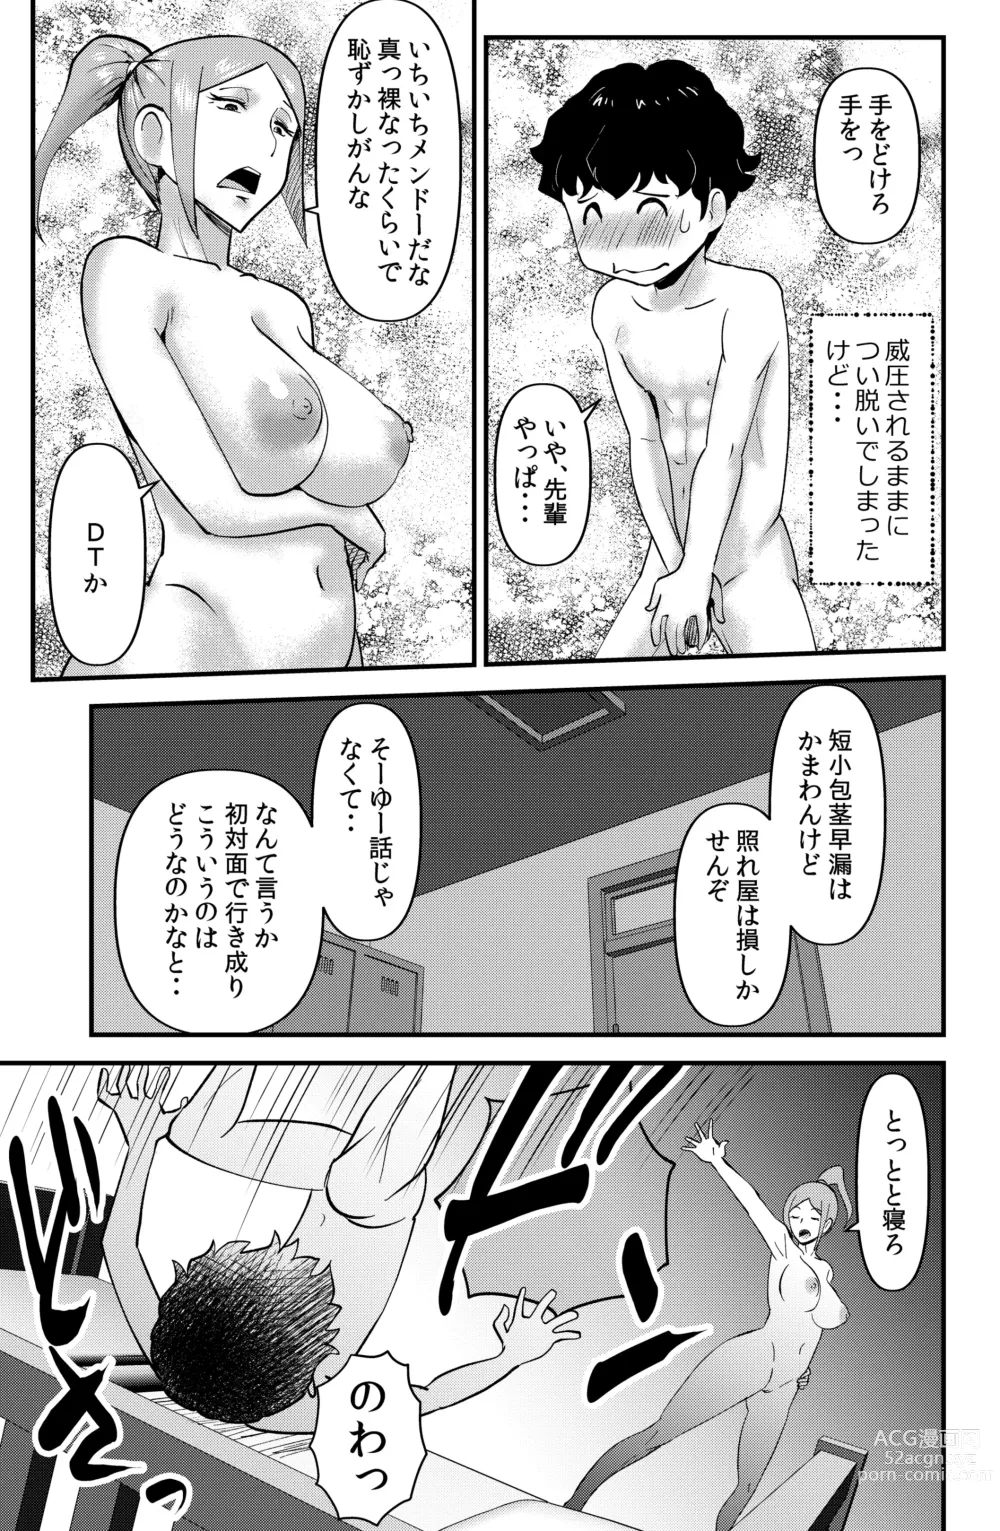 Page 5 of doujinshi Roommate